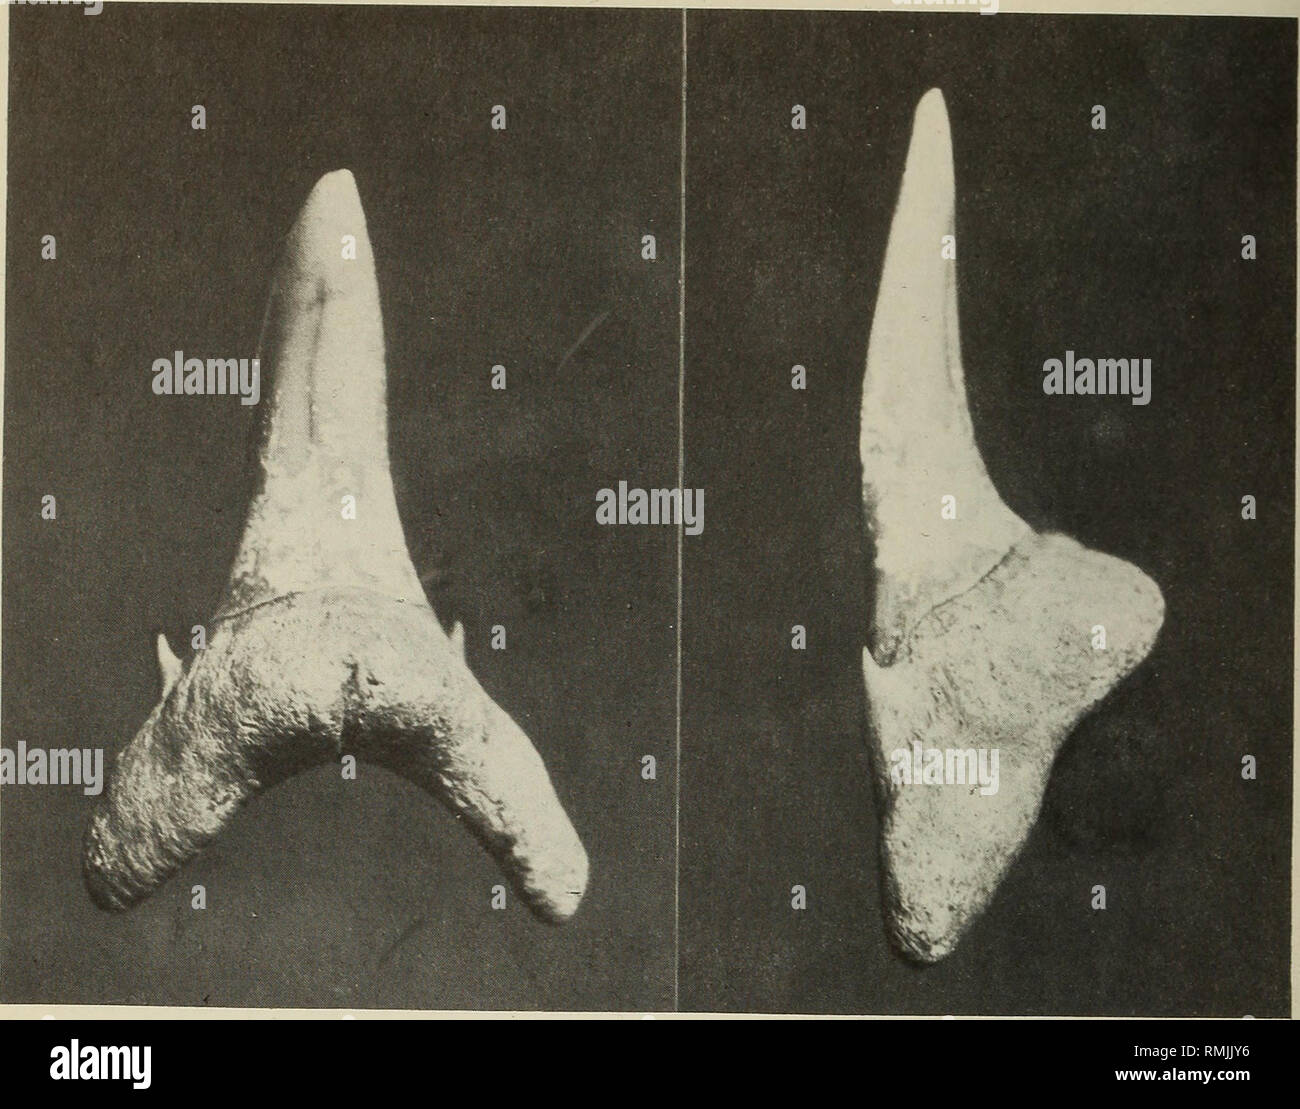 . Annals of the South African Museum = Annale van die Suid-Afrikaanse Museum. Natural history. 434 ANNALS OF THE SOUTH AFRICAN MUSEUM. Fig. 37. Tooth of Carcharias taurus Rafinesque from Birbury Farm, Bathurst District, south-east Cape. Total length 35 mm. See also Figure 38C showing teeth of C. taurus from Sapolwana, Zululand. Odontaspis macrota (Agassiz, 1843) 1843-Otodus macrotus Agassiz: vol. 3: 273, pi. 32 (figs 29-31). I8$9b—Lamna macrota (Agassiz). Woodward: 402. 1932 — Odontaspis macrota (Agassiz). Zittel: 76. 1962 — Odontaspis macrota (Agassiz). Mountain: 9. 1973 — Odontaspis macrota  Stock Photo